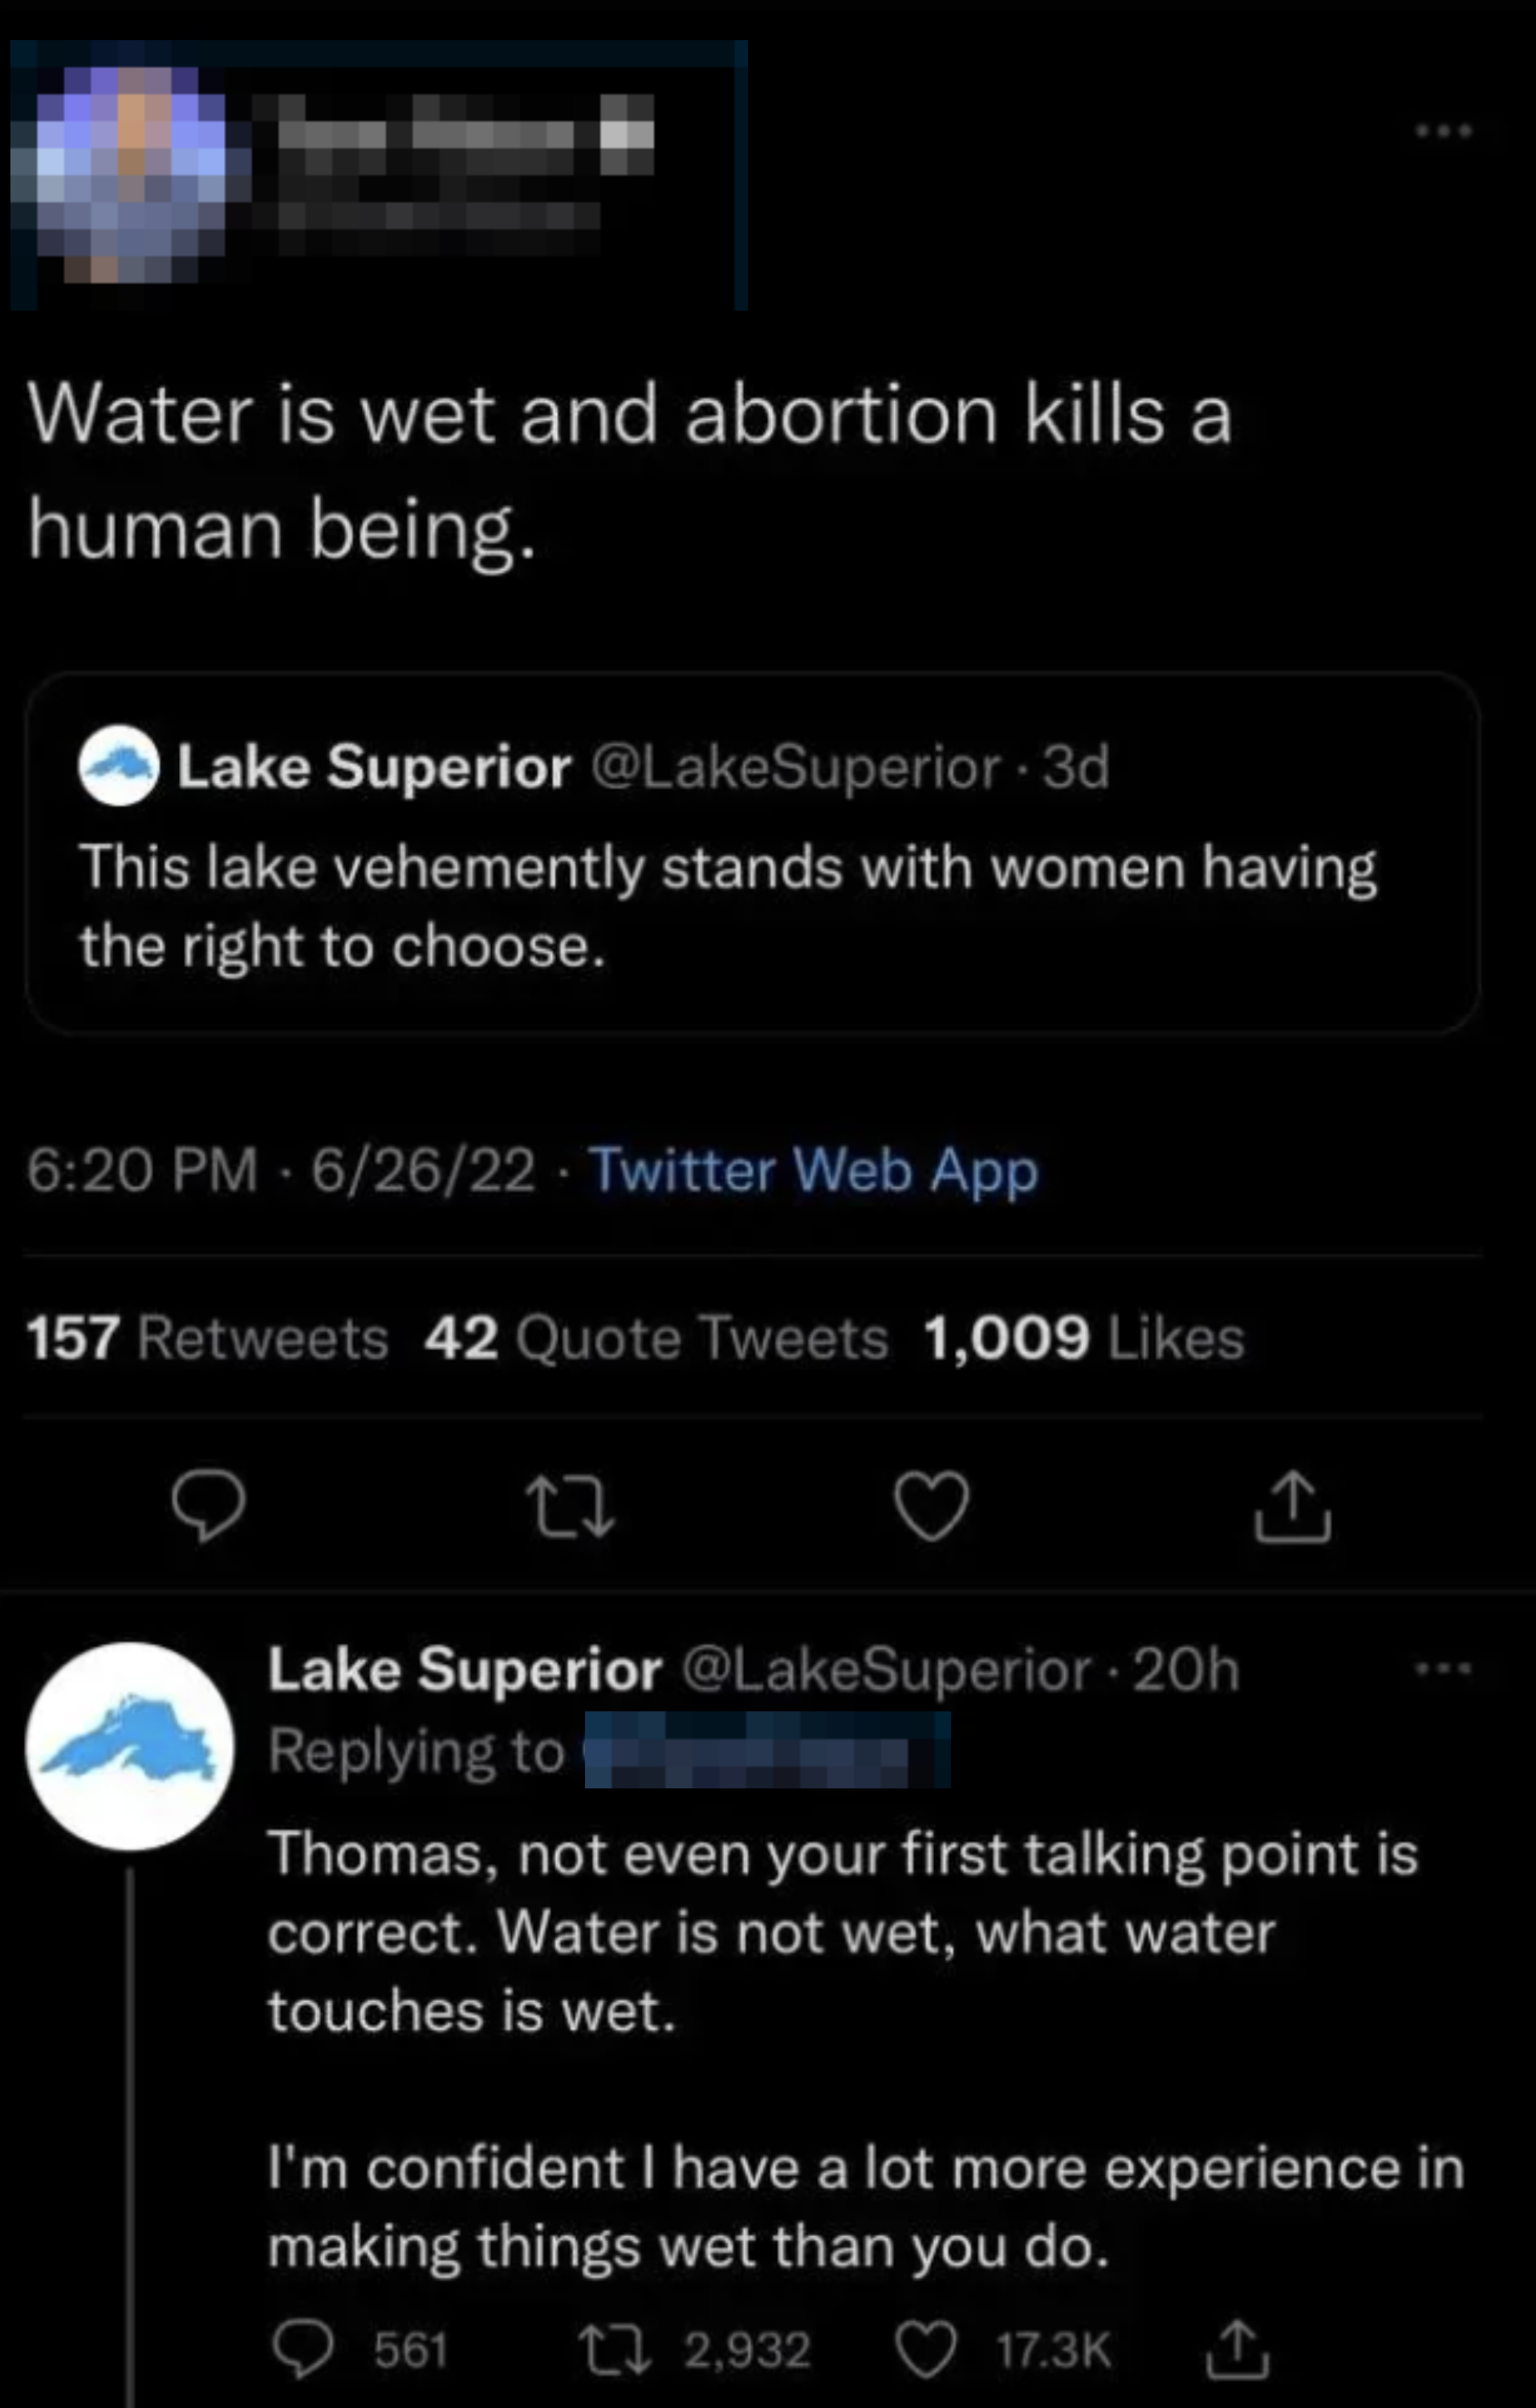 A Twitter conversation thread with users and @LakeSuperior discussing water&#x27;s non-lethal qualities.